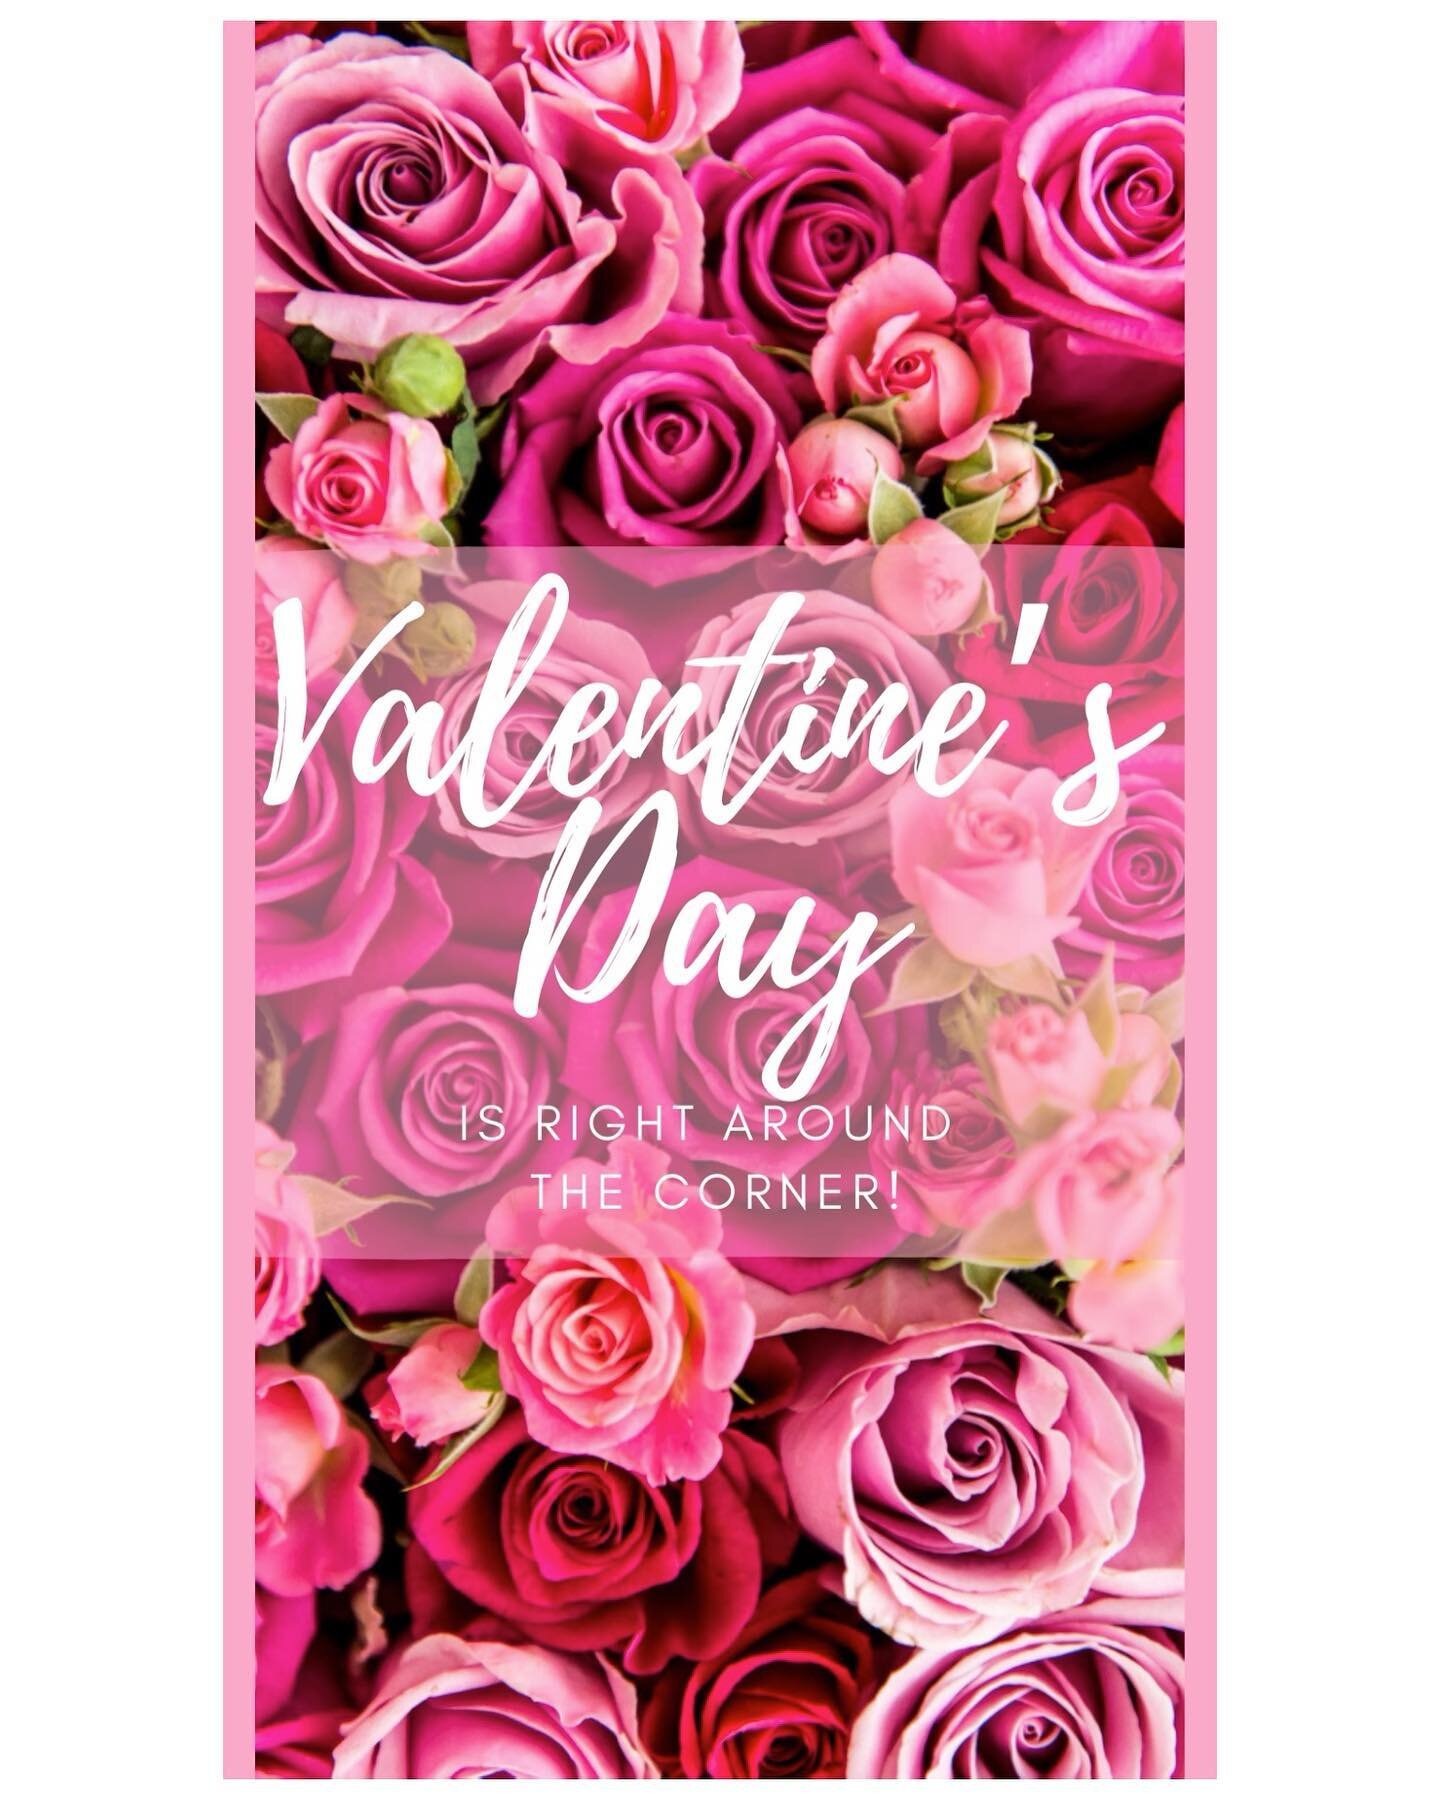 This Sunday is Valentine&rsquo;s Day! 💕
.
Don&rsquo;t Forget, Schedule Your Flowers for Curbside Pick Up or Delivery &hearts;️
. 
S h o p 🌹 O n l i n e . at www.pinkpetals.ca (Click the Link in our Bio!)
.
Please contact Pink Petals at info@pinkpet